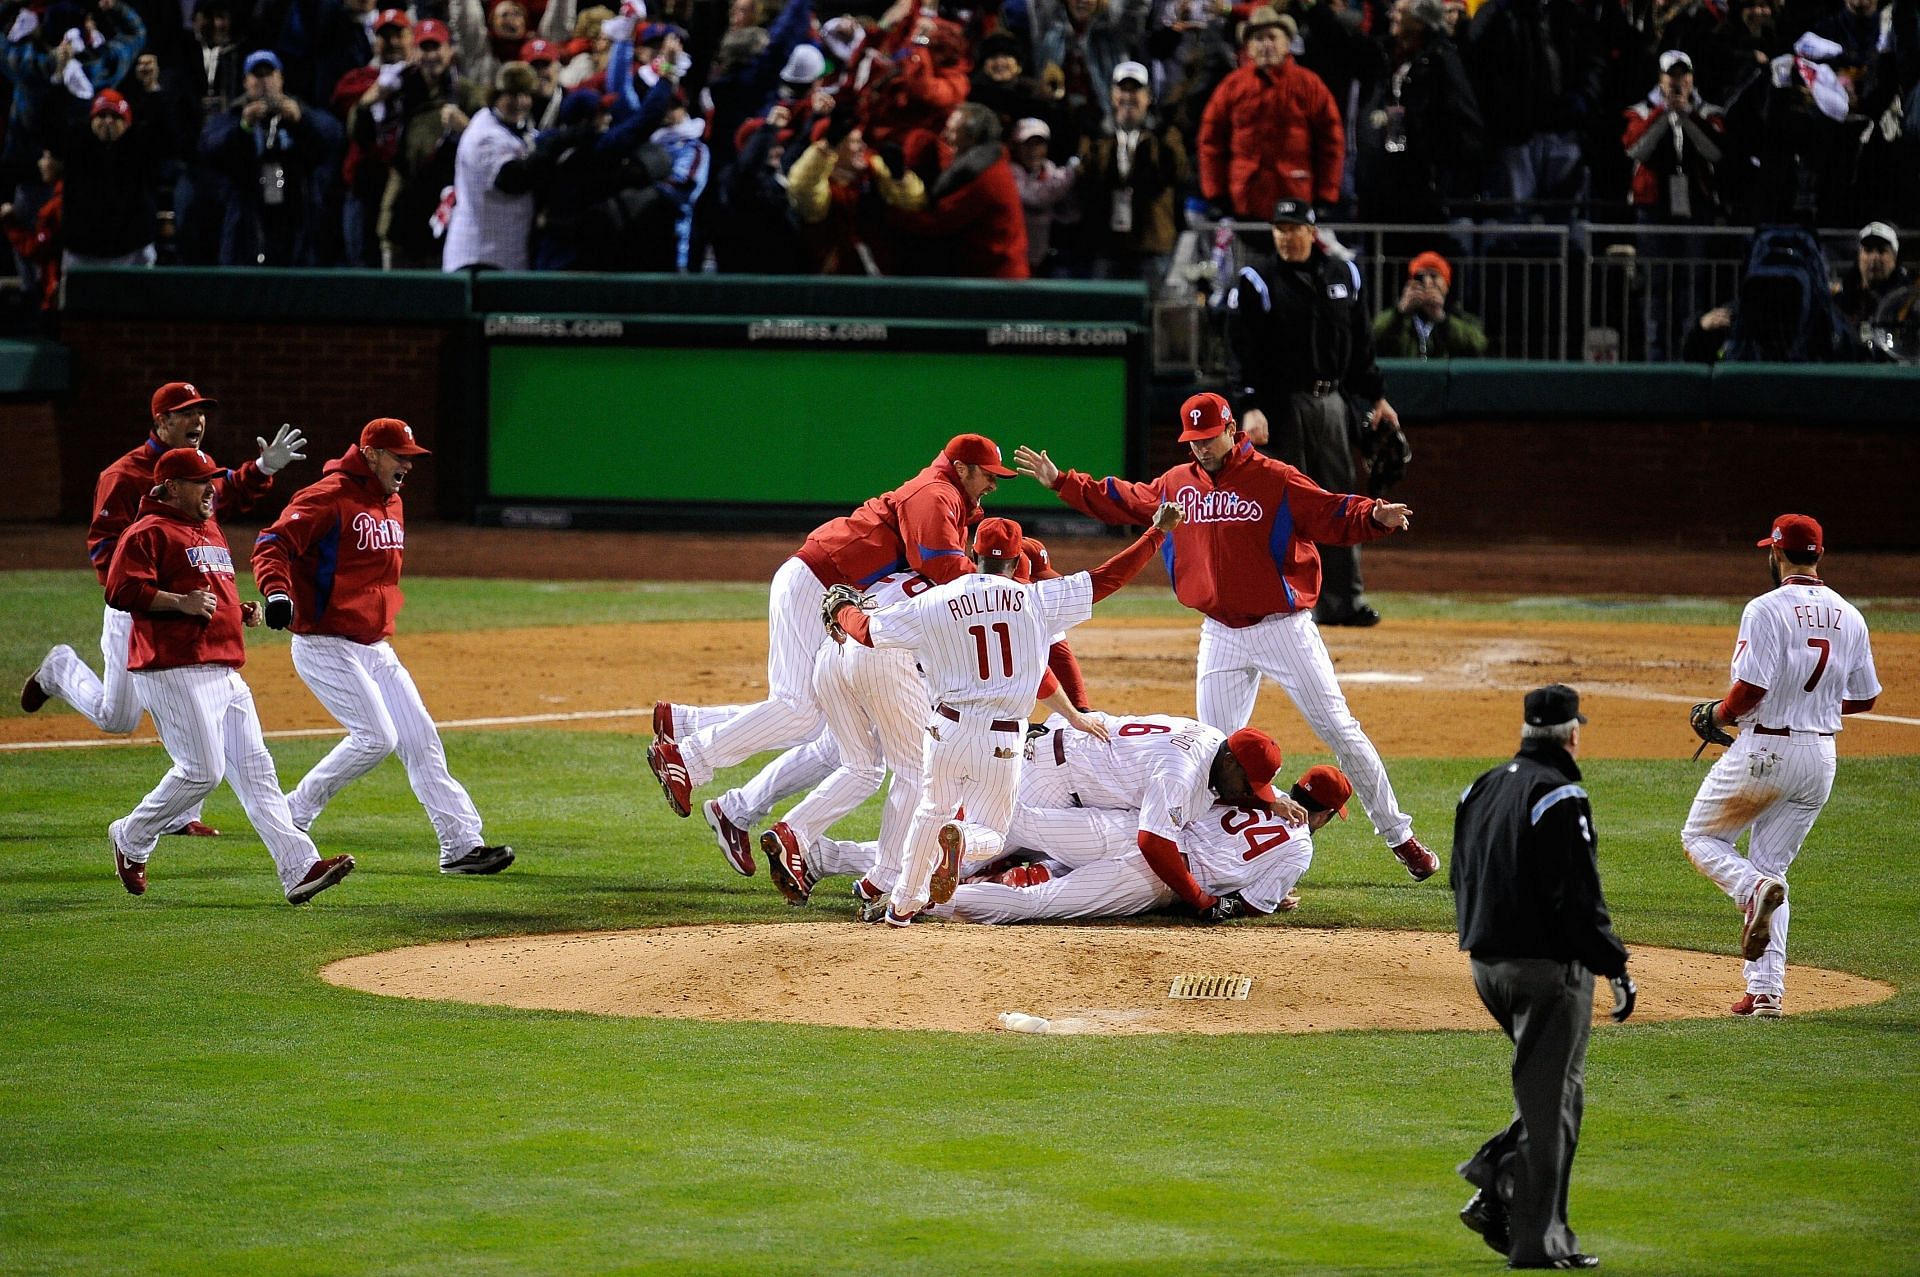 When was the last time the Philadelphia Phillies got to the World